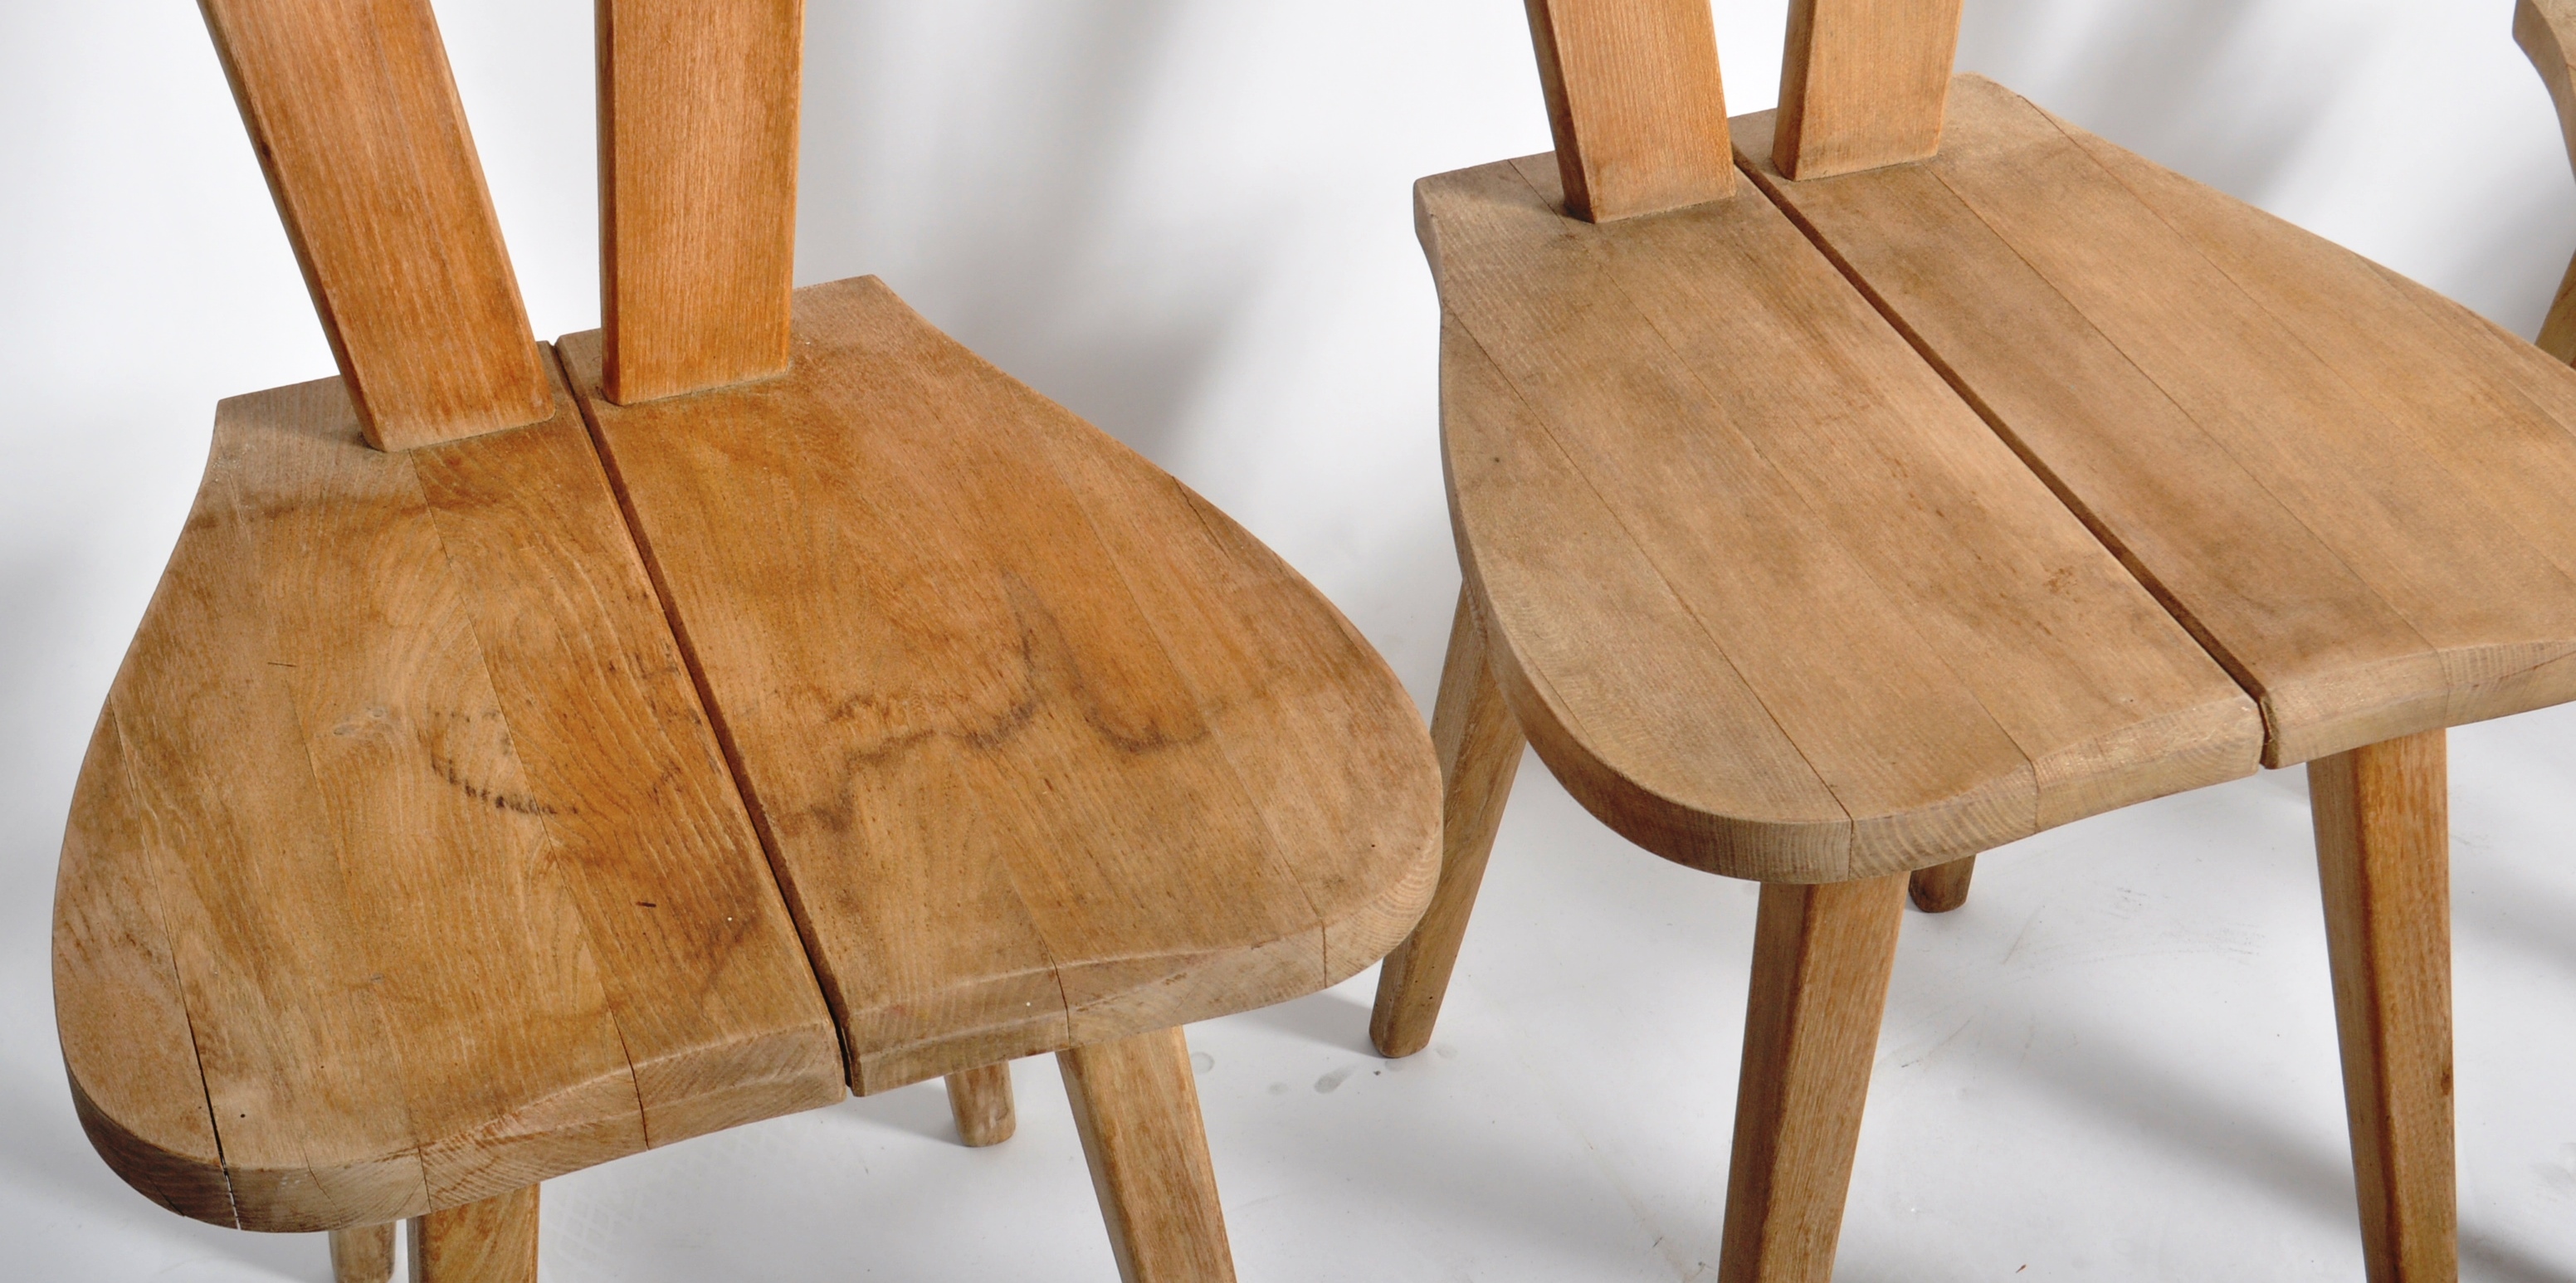 ZYDEL BY WINCZE & SZLEKYS - SET OF FOUR DINING CHAIRS - Image 3 of 7